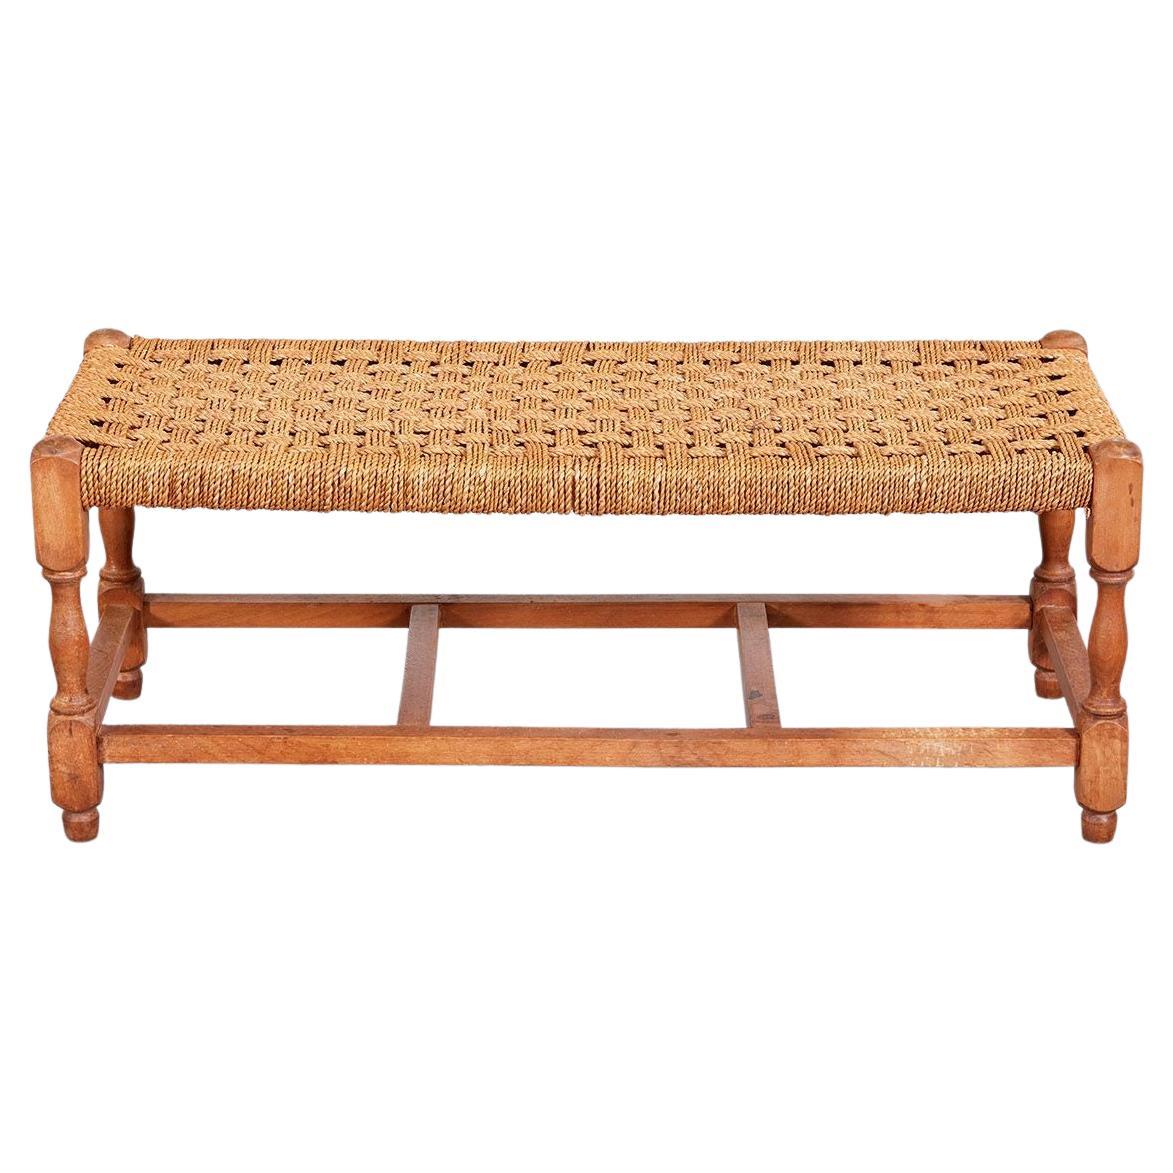 1930's English Rope Bench